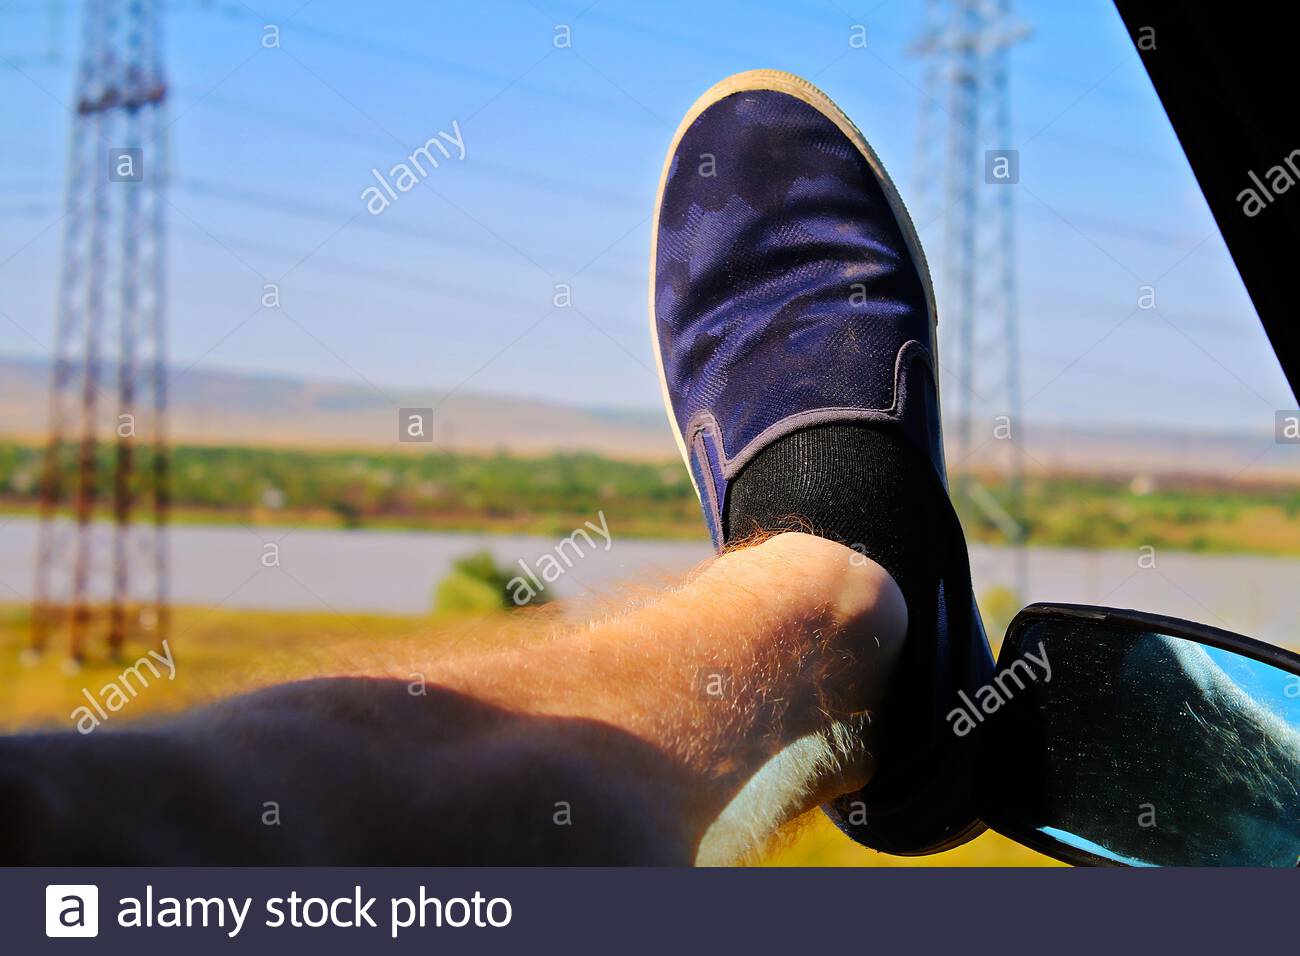 the-driver-put-his-foot-out-the-window-of-the-car-to-cool-it-summer-heat-heat-in-the-car-wind-...jpg